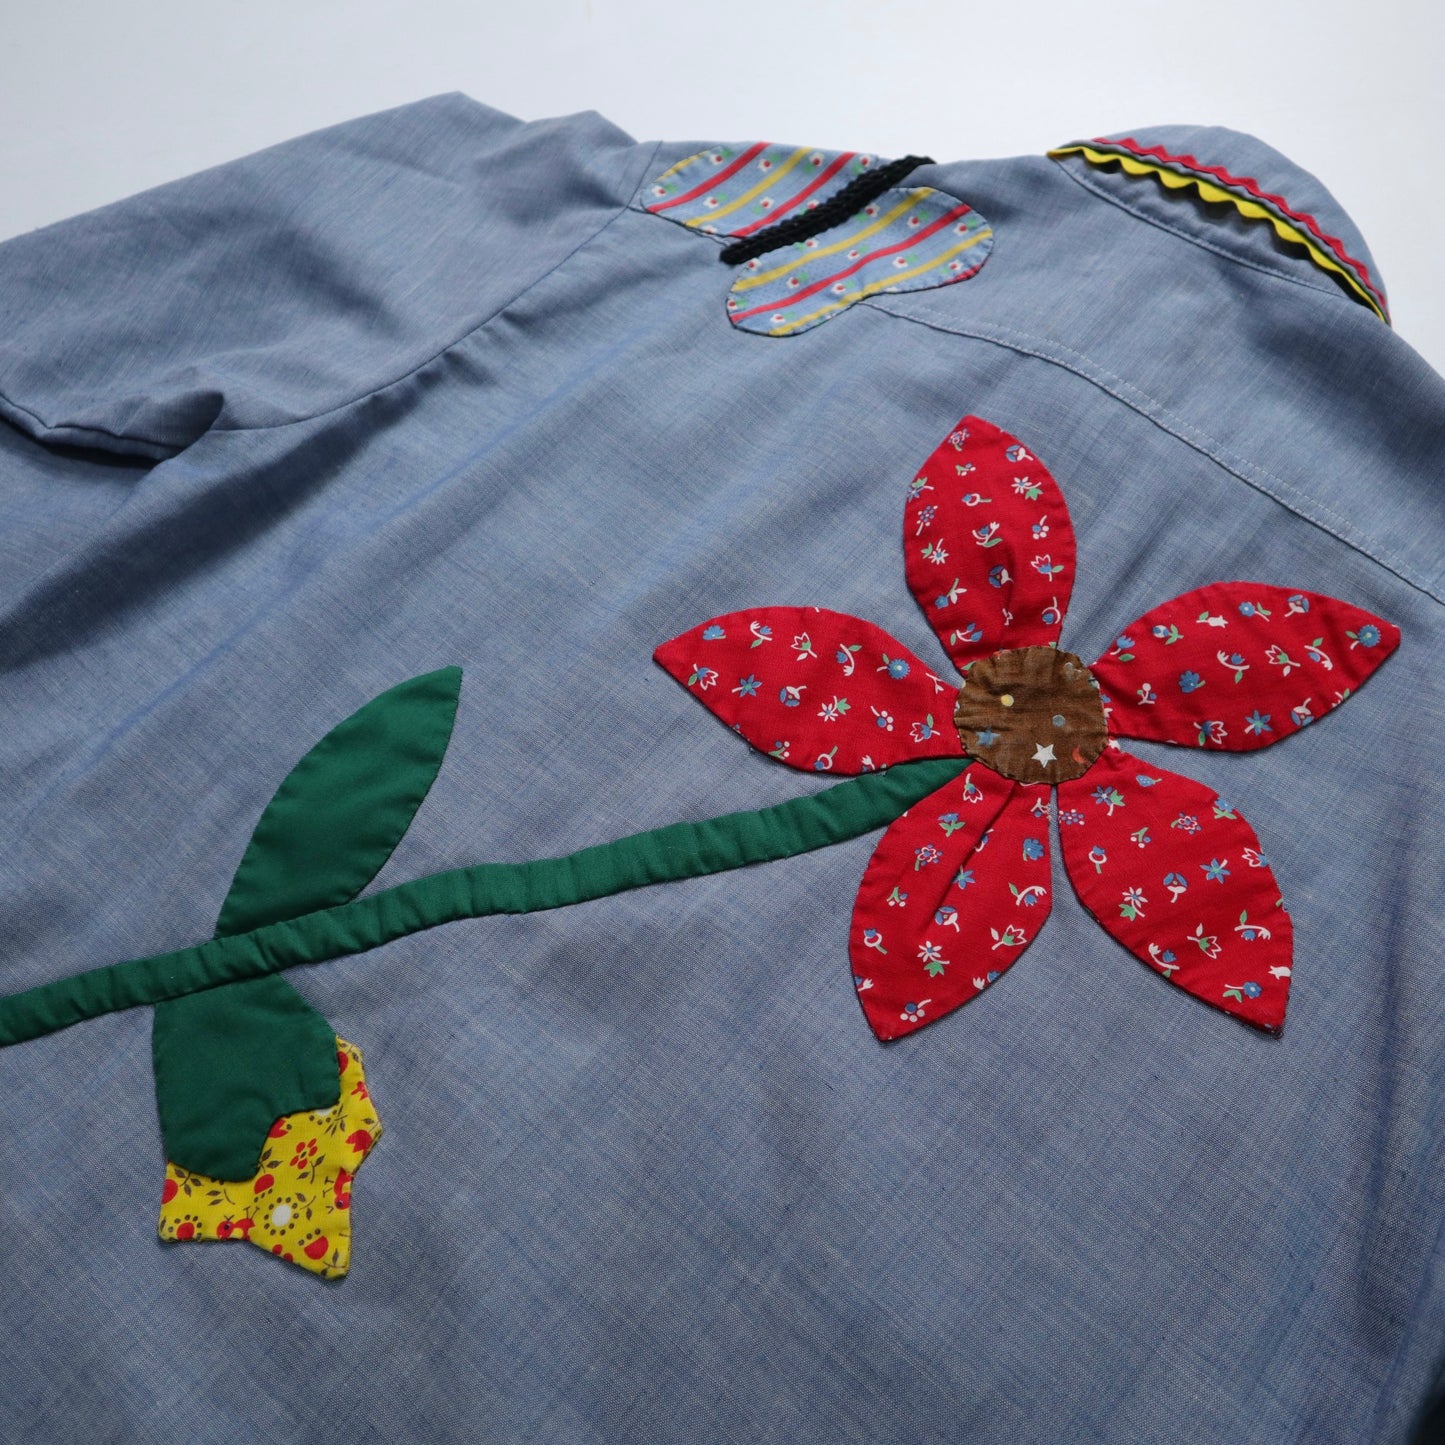 1970s Big Mac chambray double pocket floral patchwork shirt